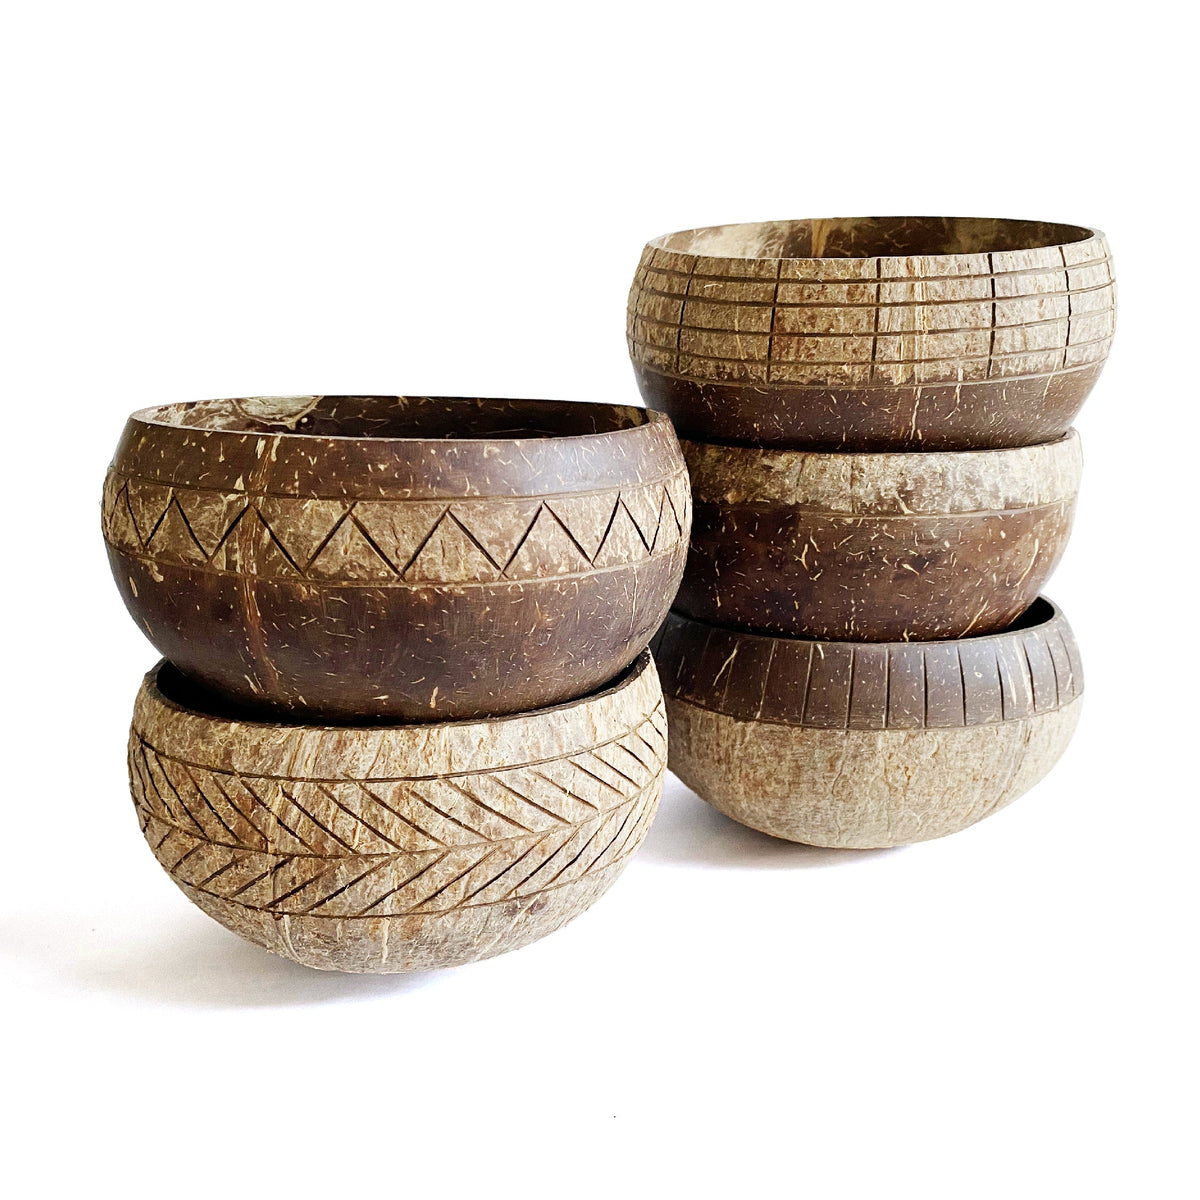 carved Jumbo coconut bowls